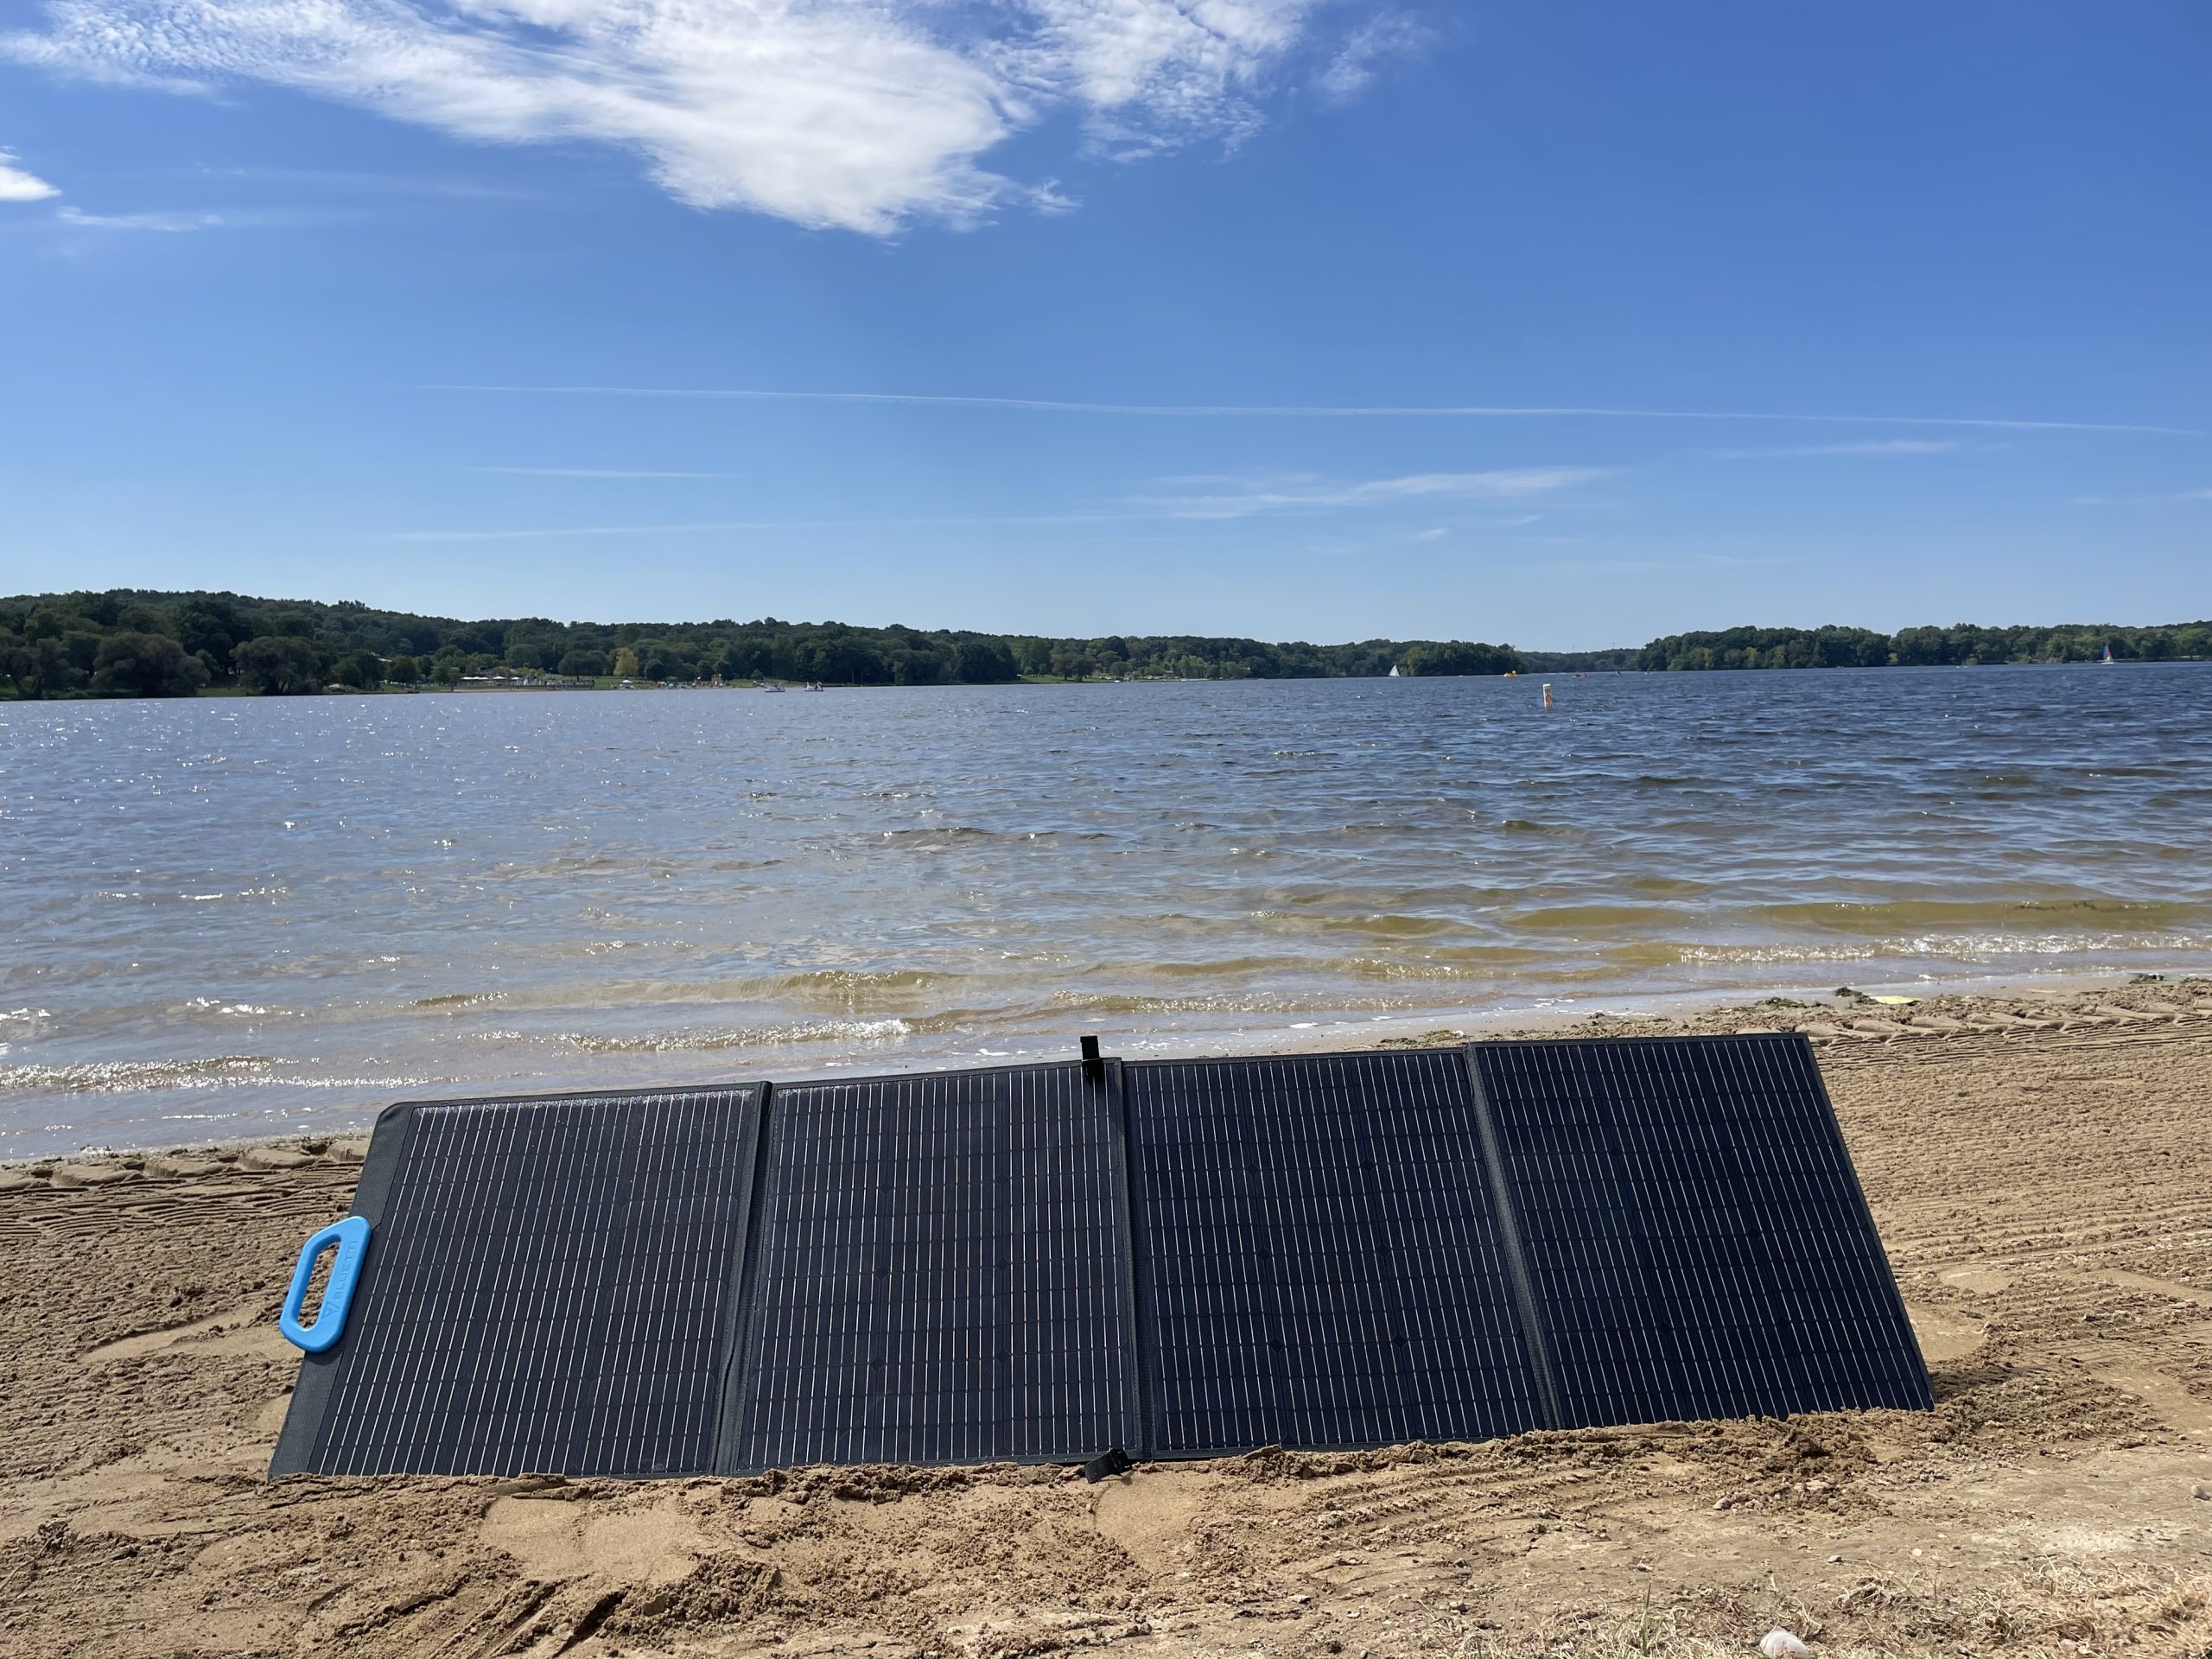 bluetti PV200 solar panel on a sandy beach with a lake in the background